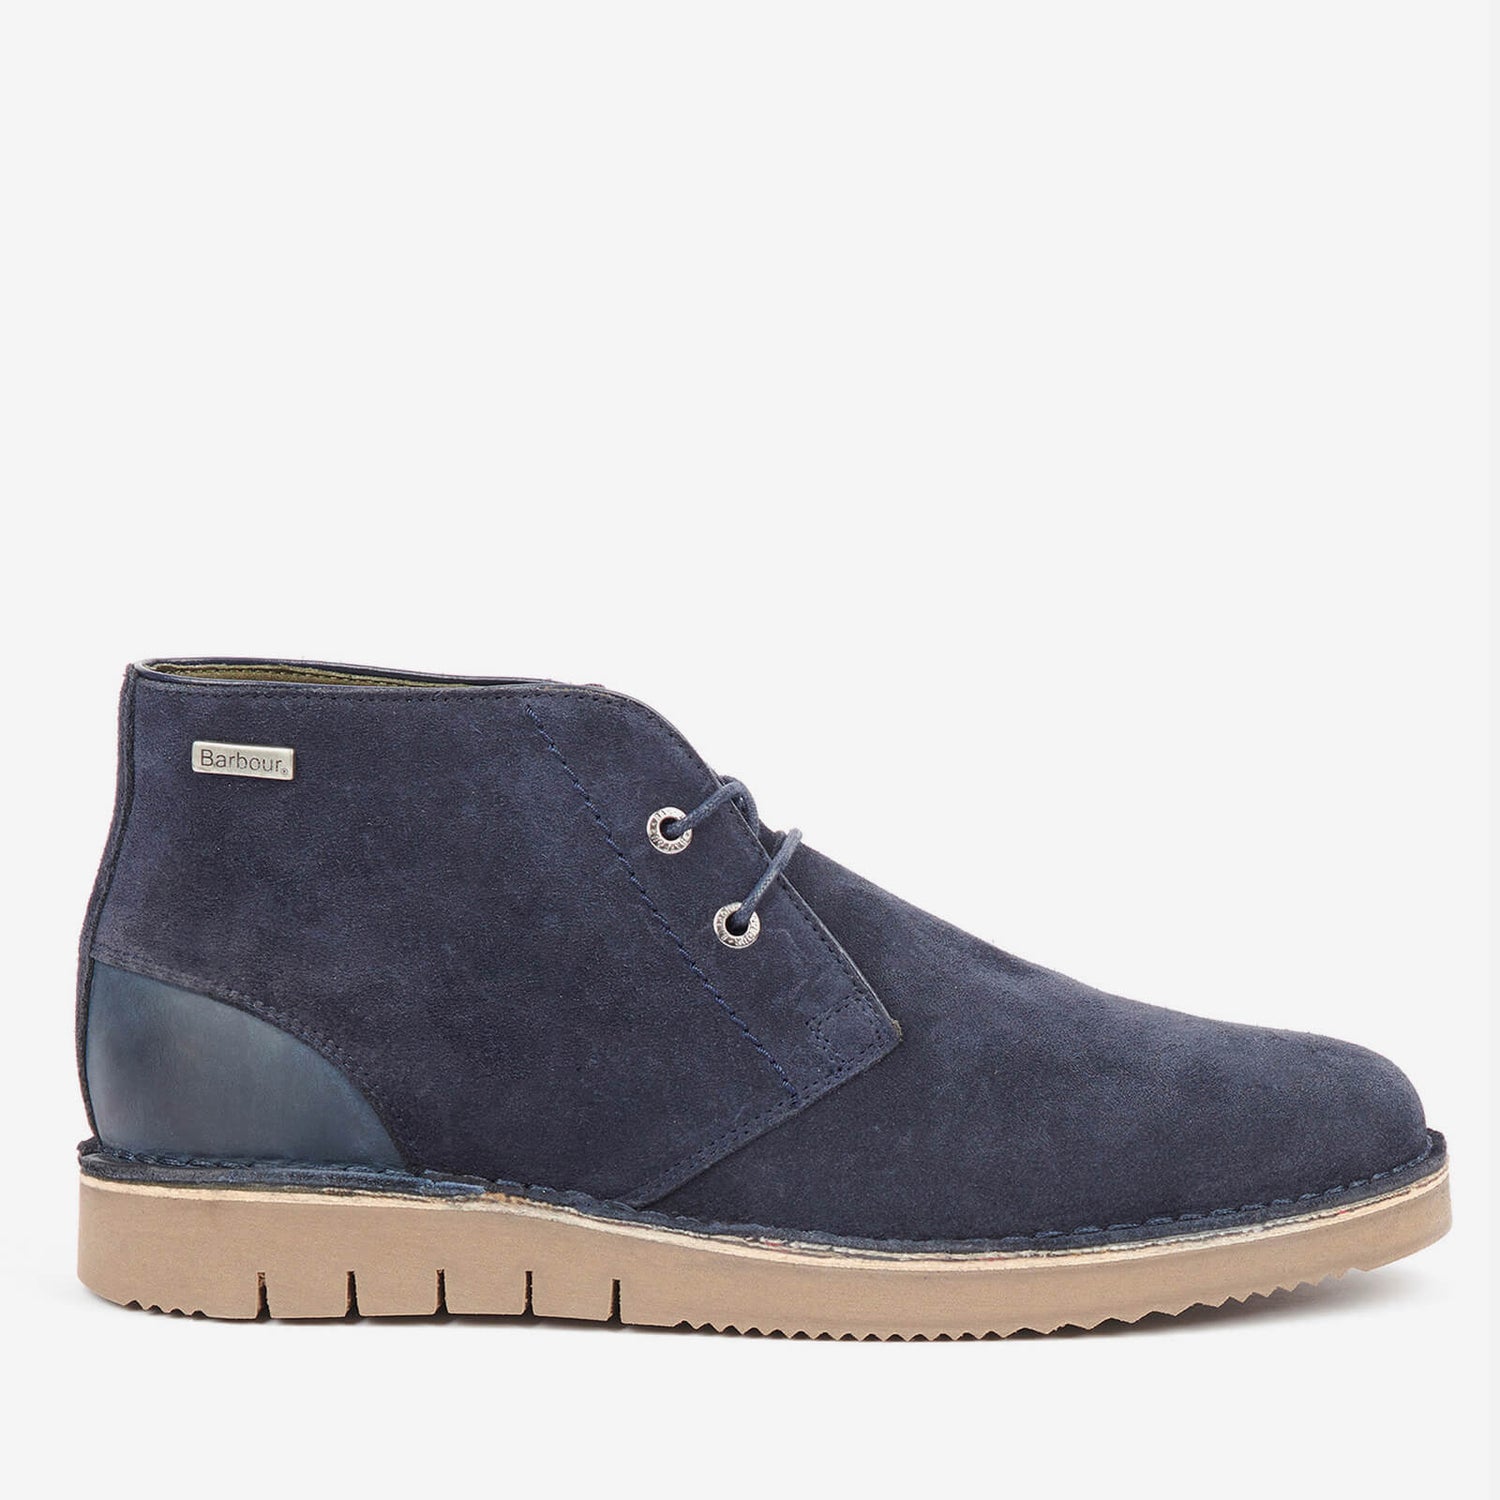 Barbour Kent Suede and Leather Chukka Boots - UK 7